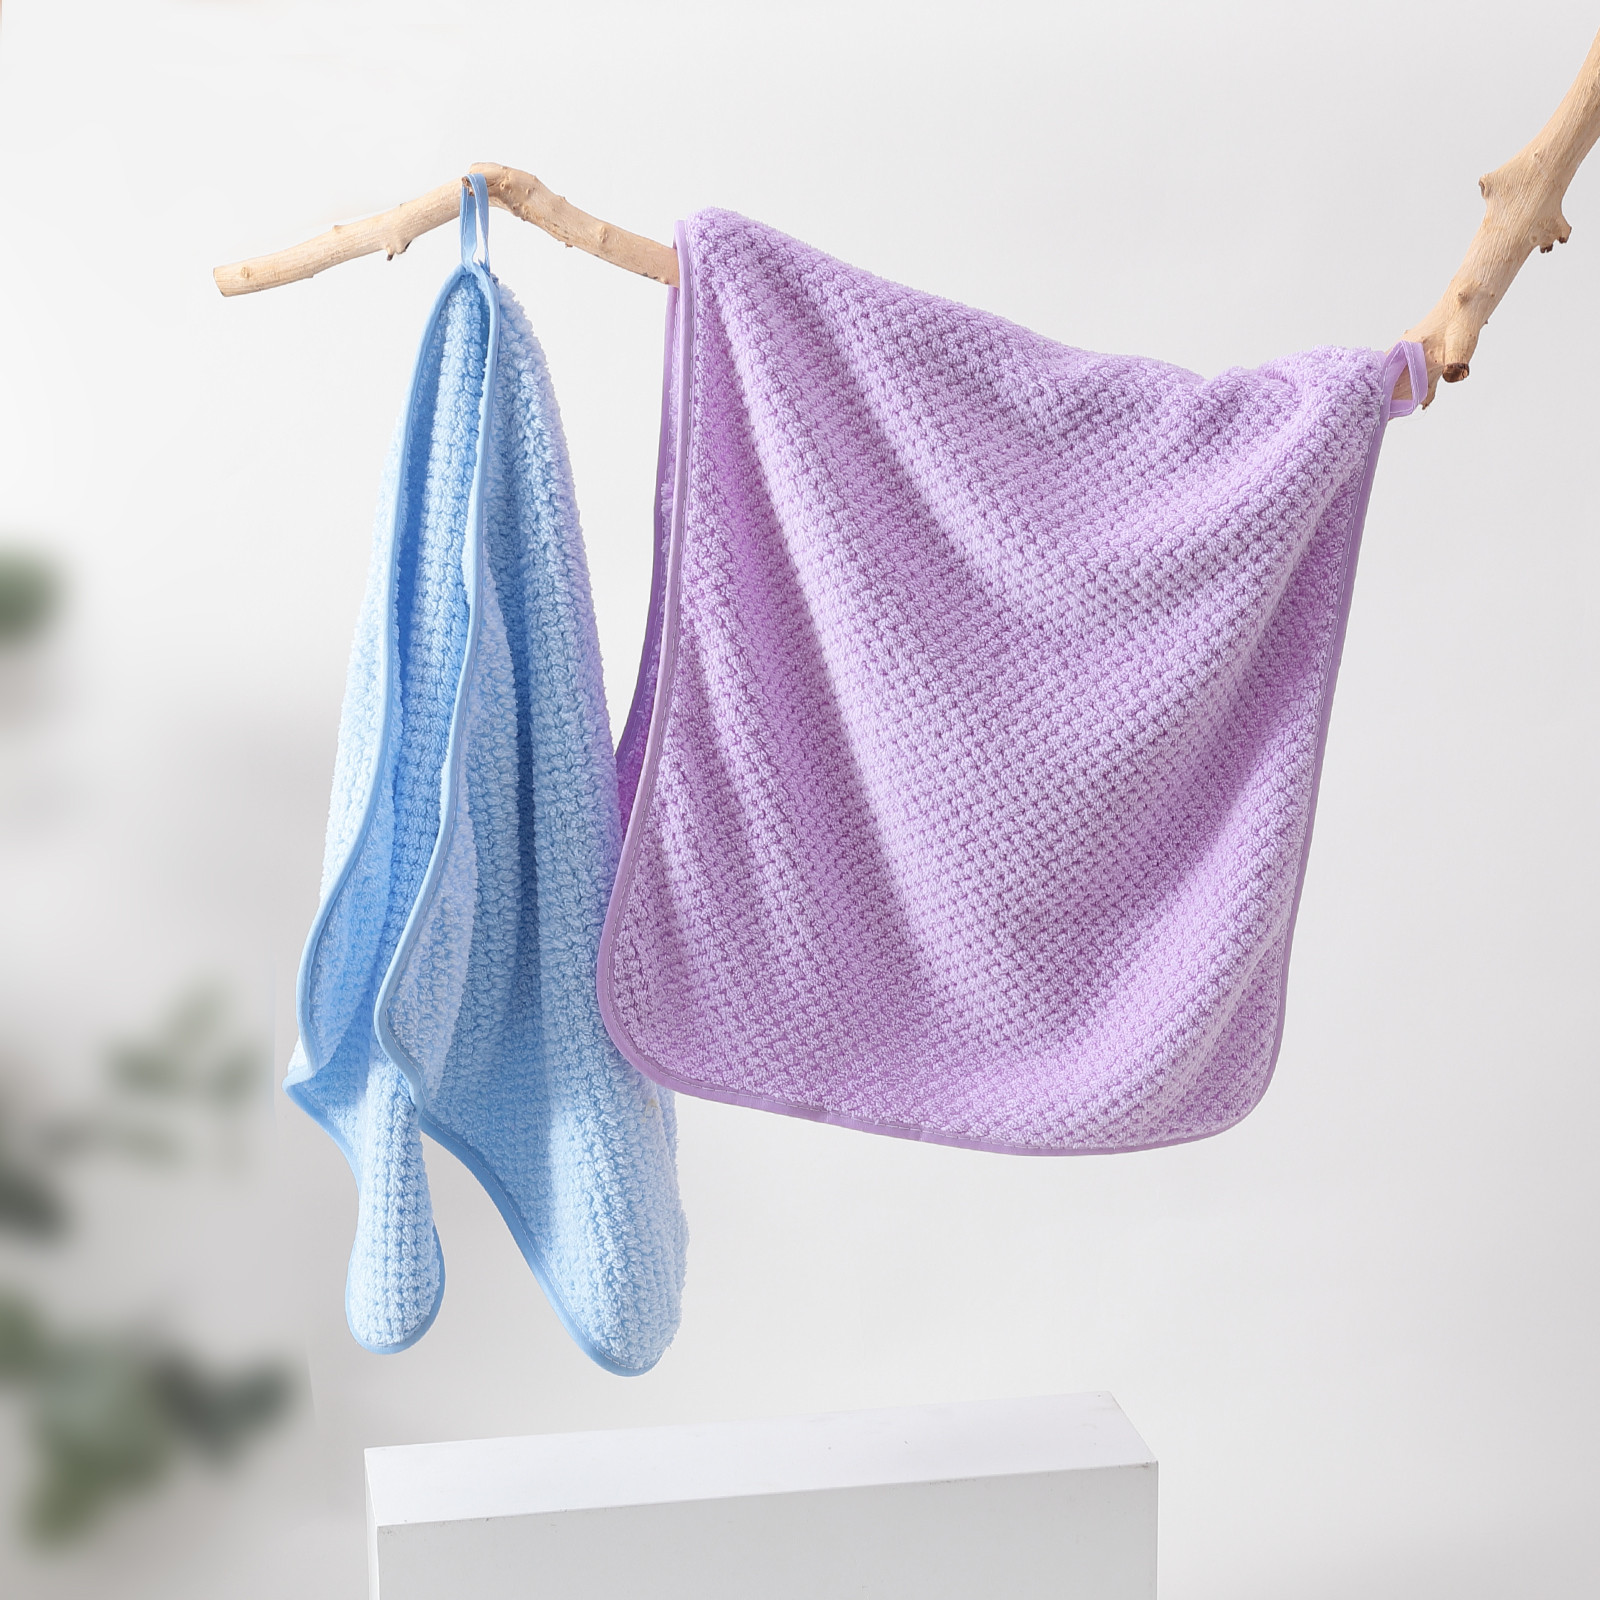 Kuber Industries 2 Piece Hand Towel Set|280 GSM|Gtm & Workout Towels|Super Absorbent & Antibacterial Treatment|Small Size, Travel Friendly  (Blue & Purple)